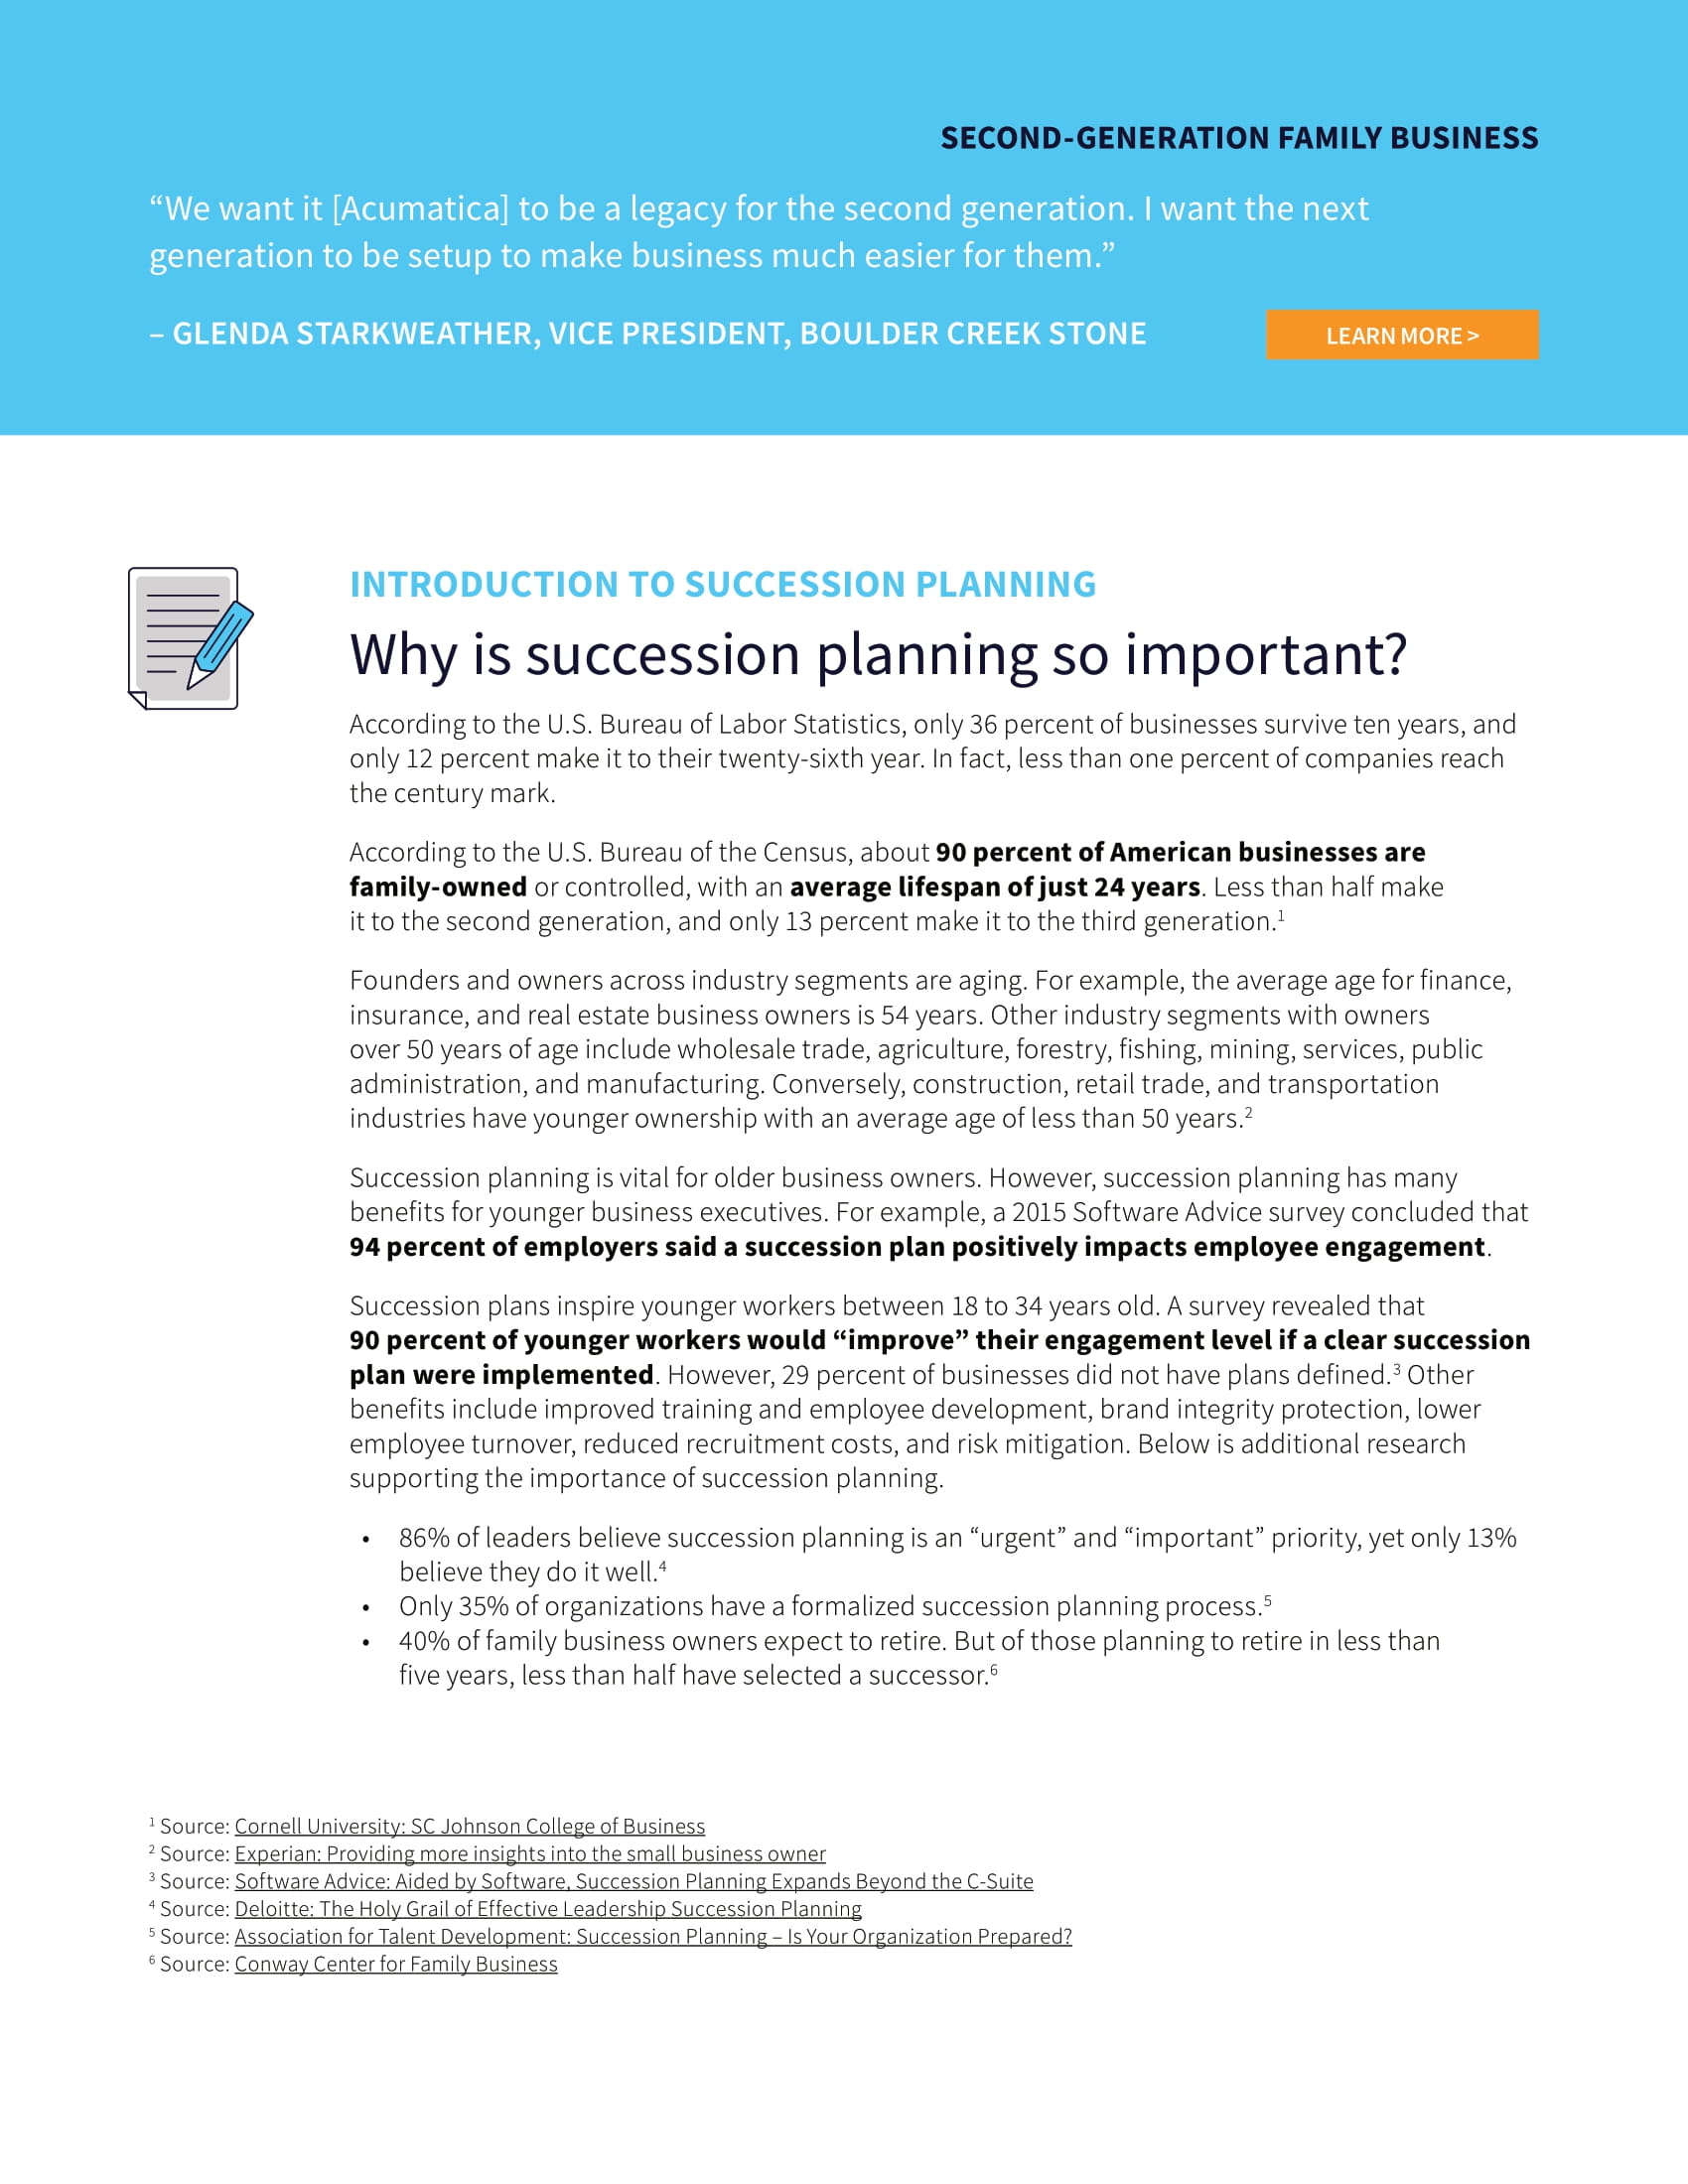 Succession Planning In 4 Easy Steps, page 1